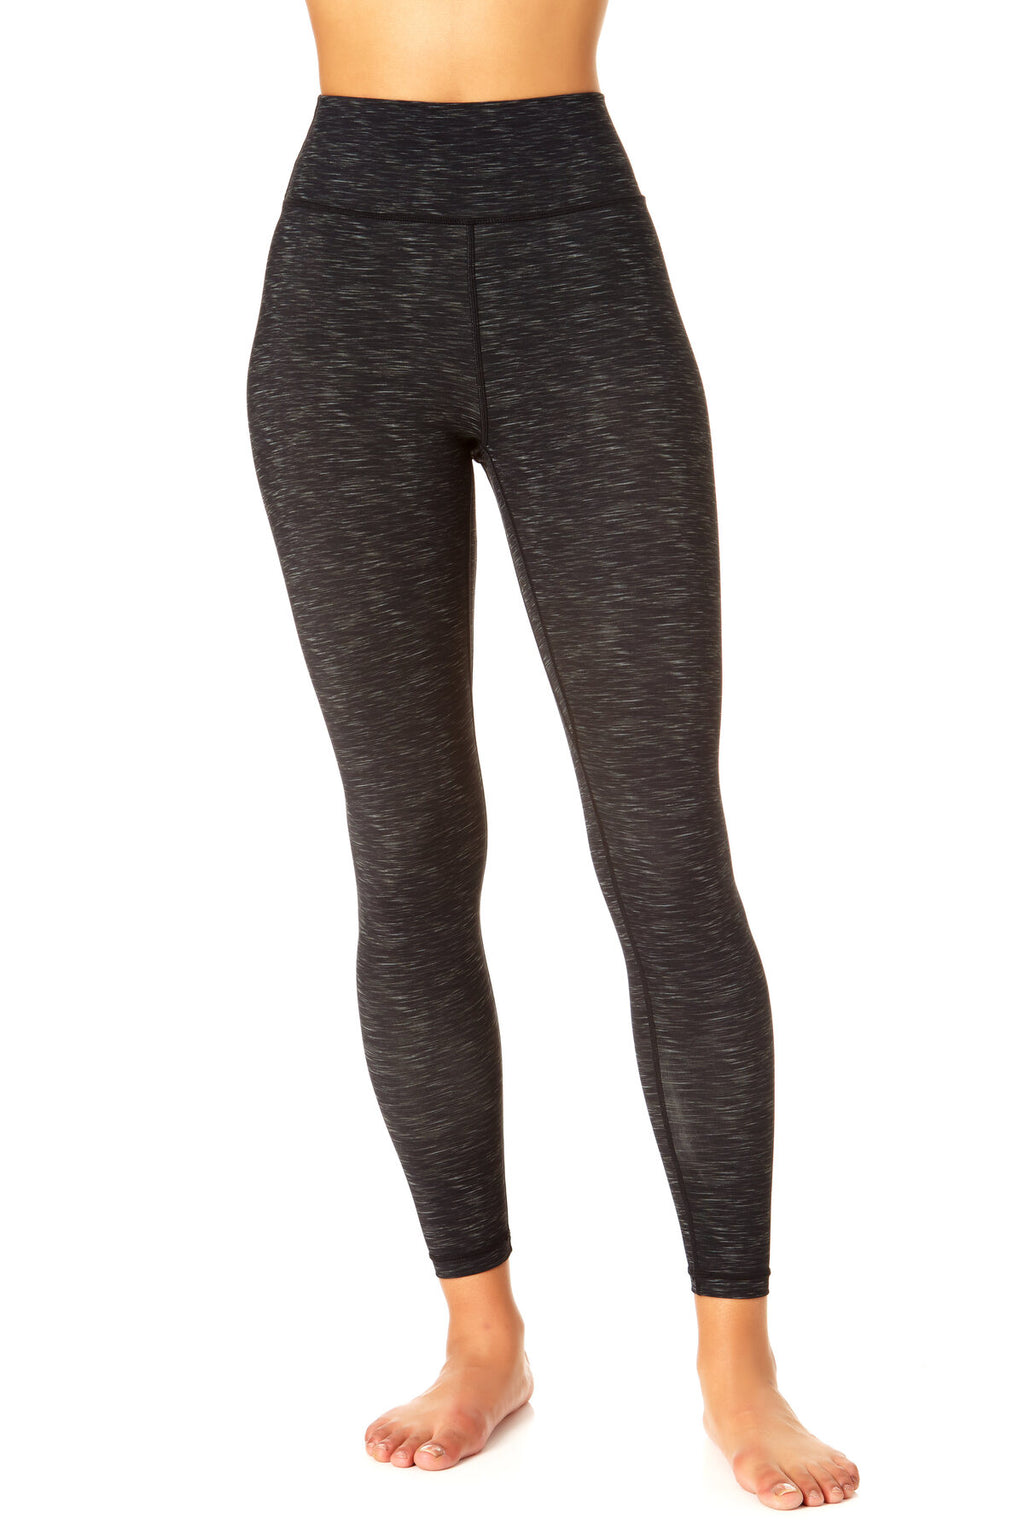 Women's Classic Full High Waisted Leggings - Anne Cole Active